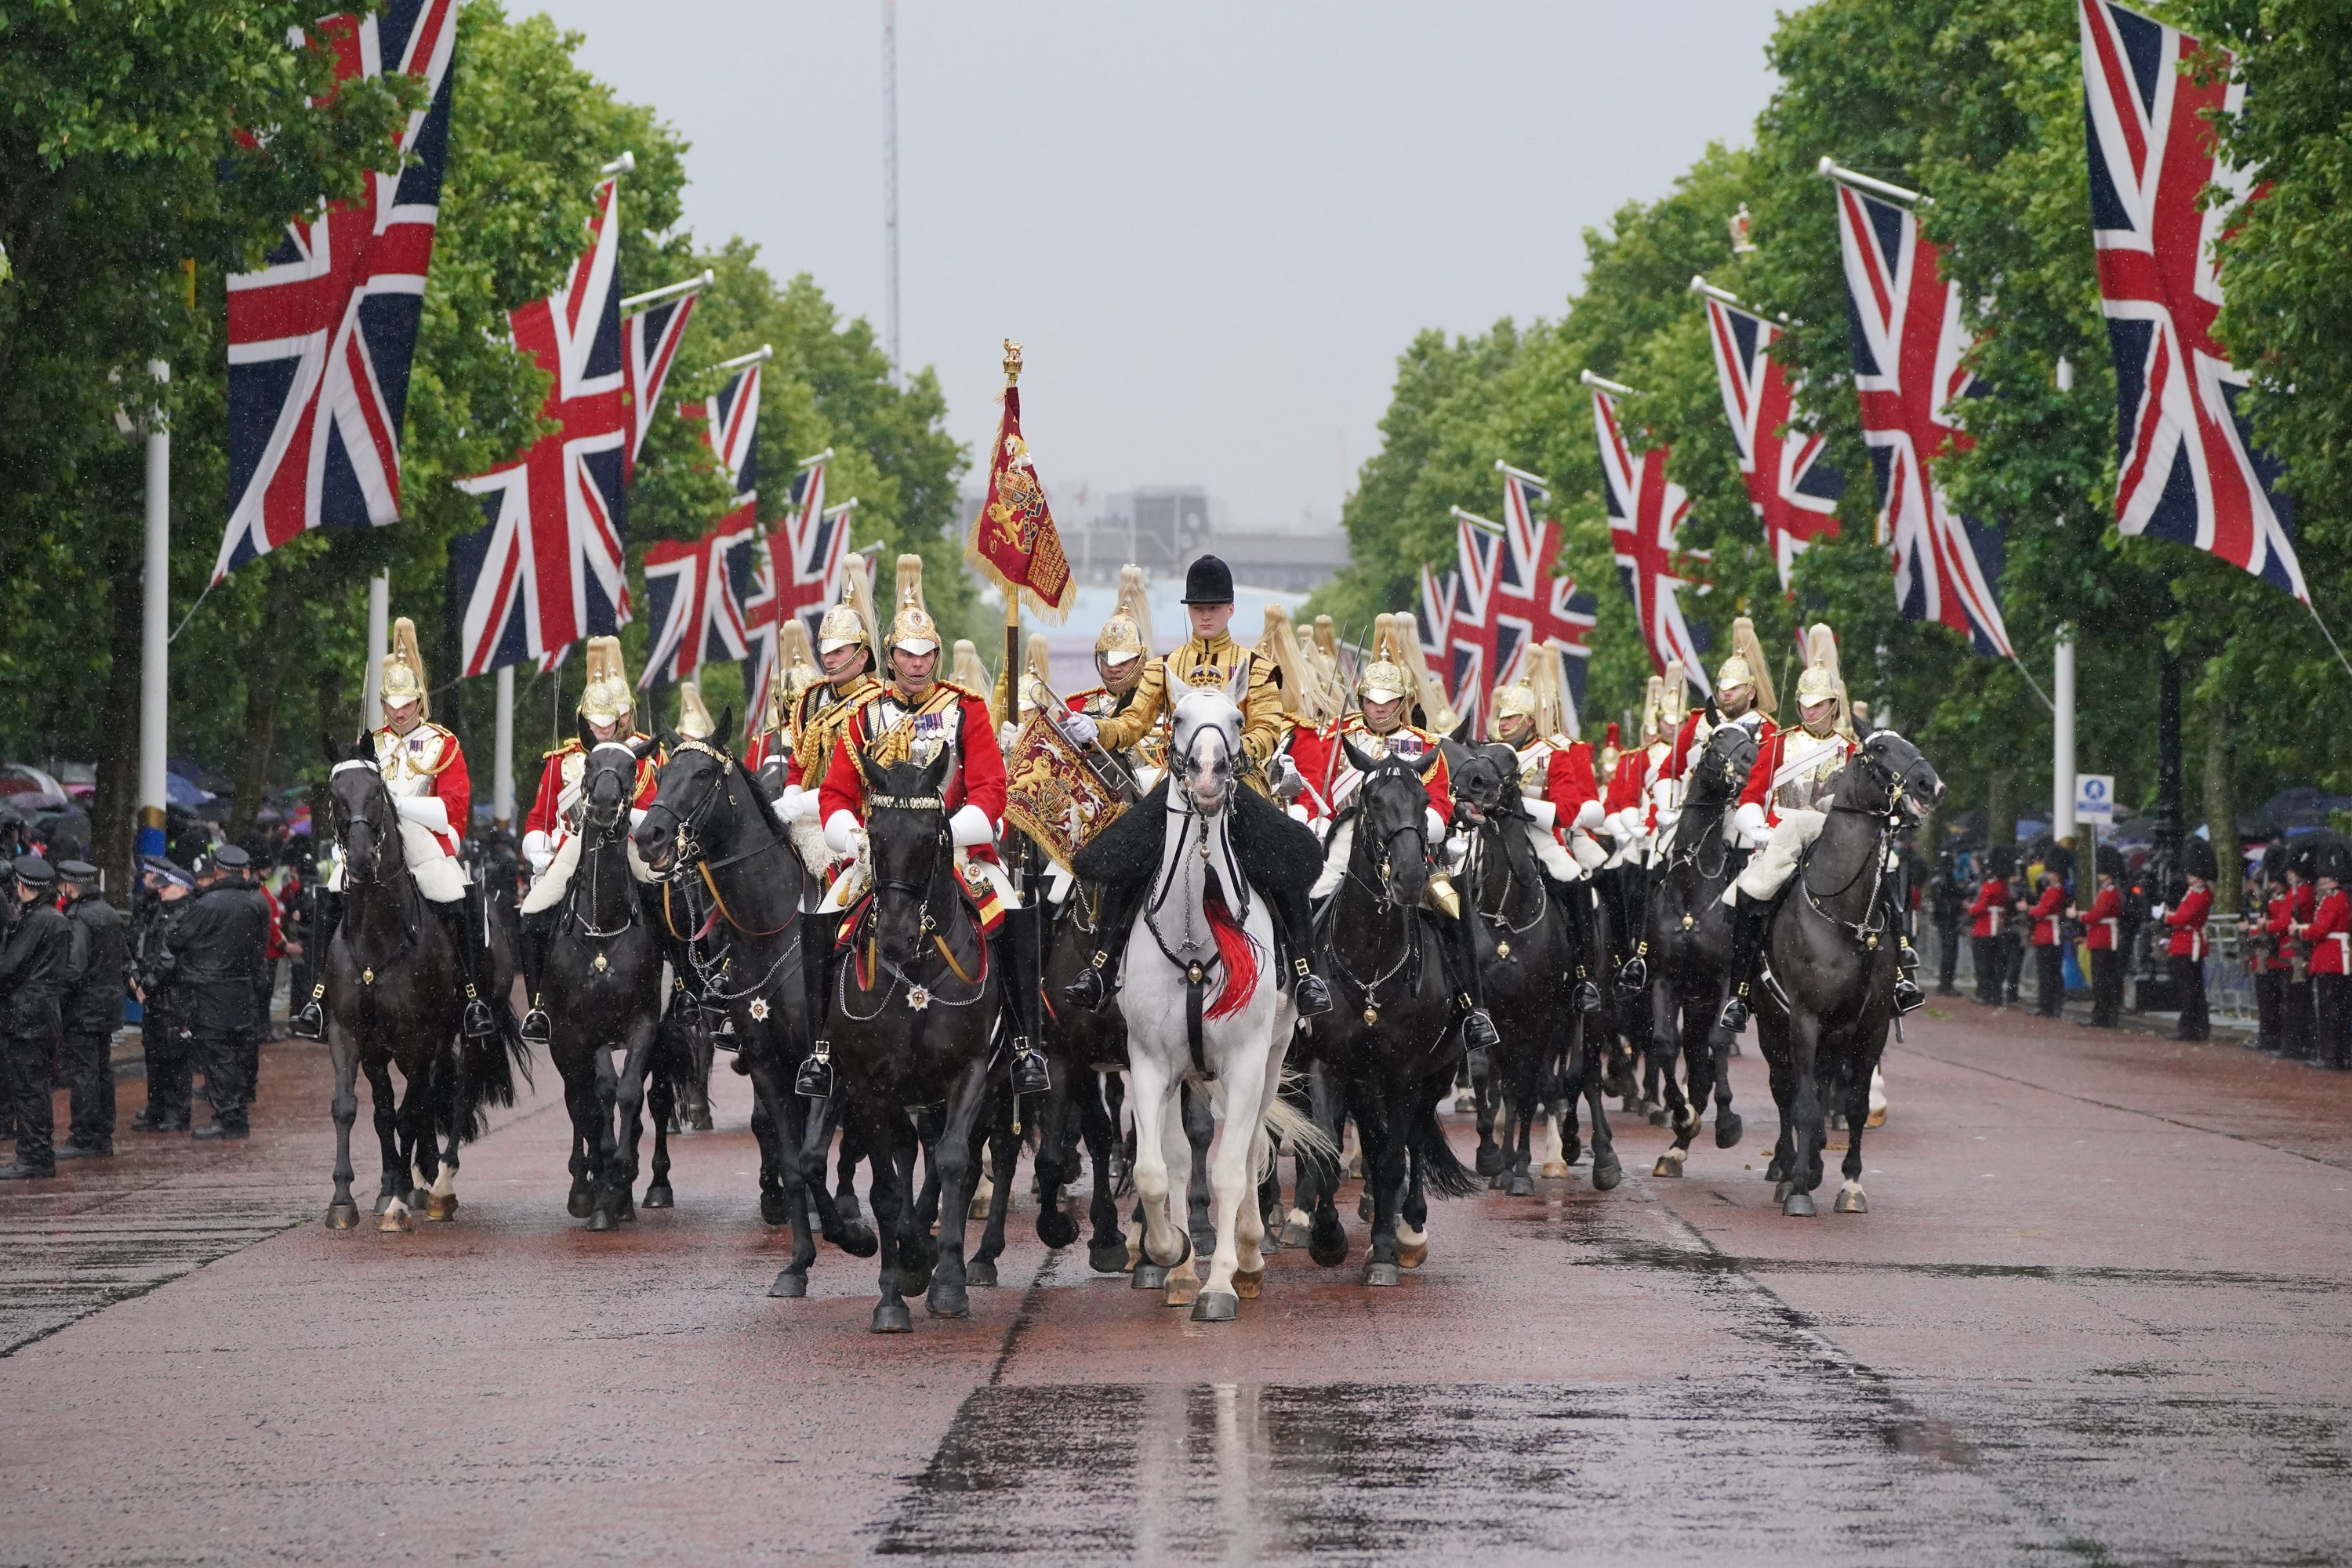 Thundery showers and rain impacted the Trooping the Colour